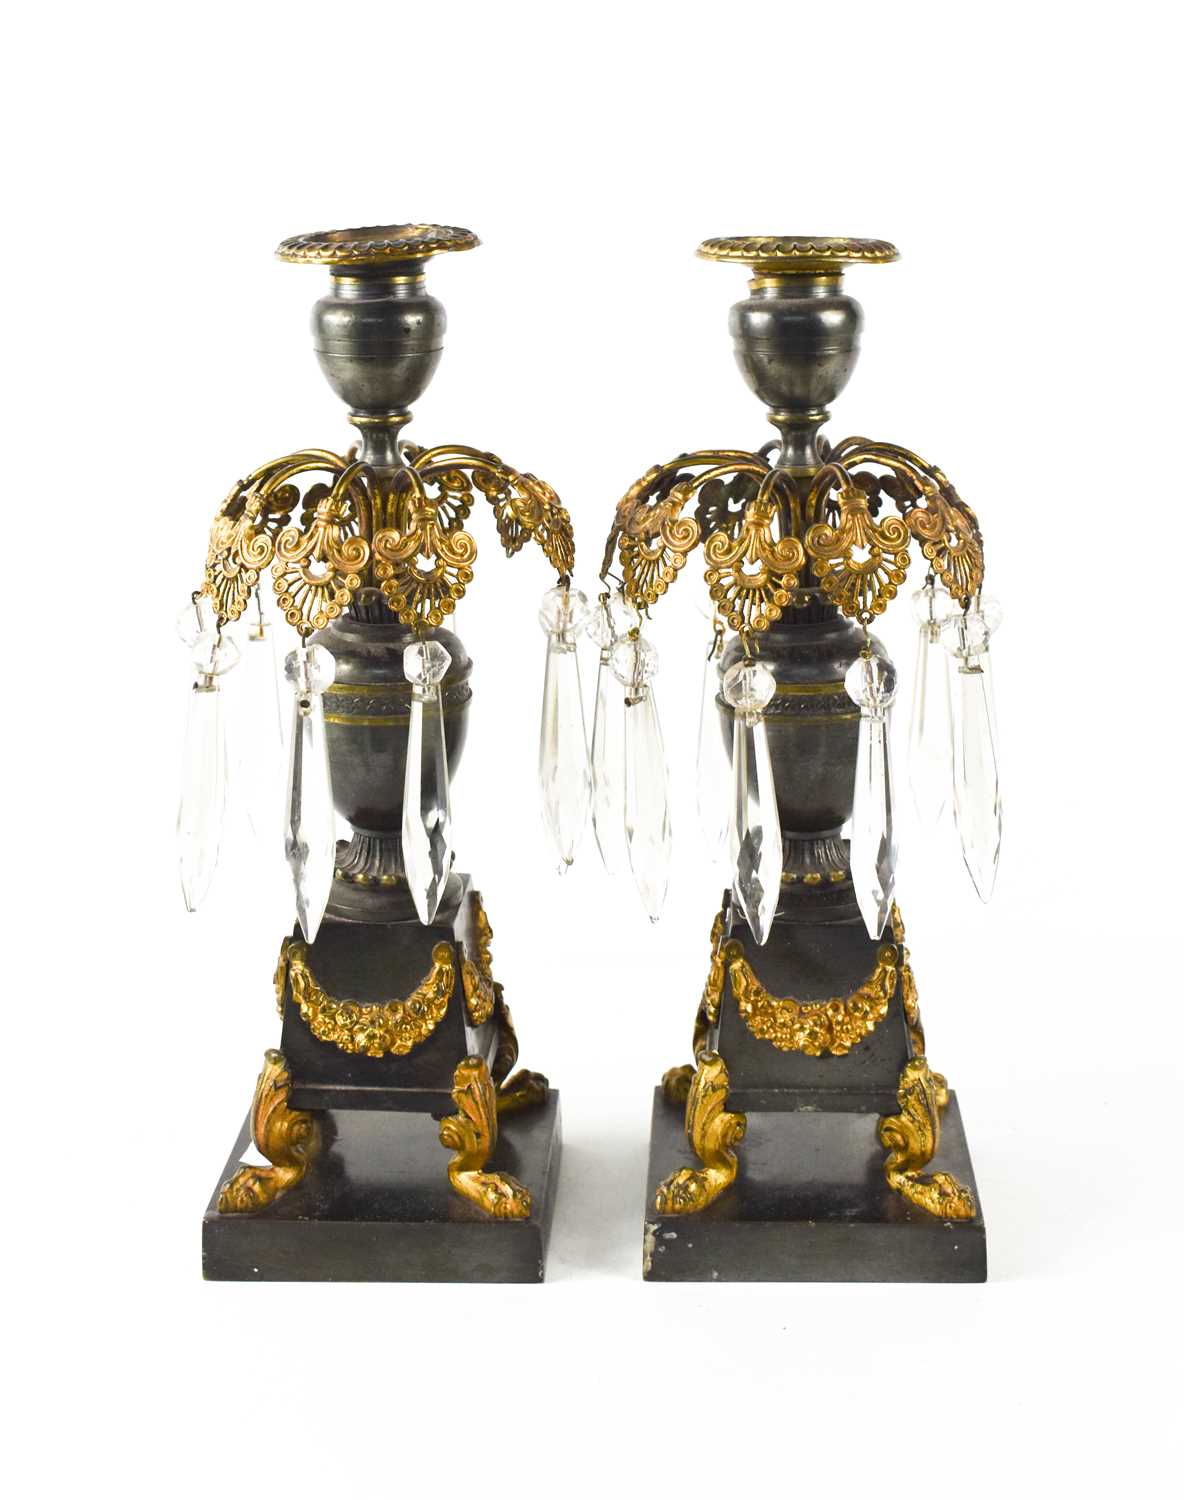 A pair of Empire gilt bronze candlesticks, the candle socket above a pierced and gilded leaf form